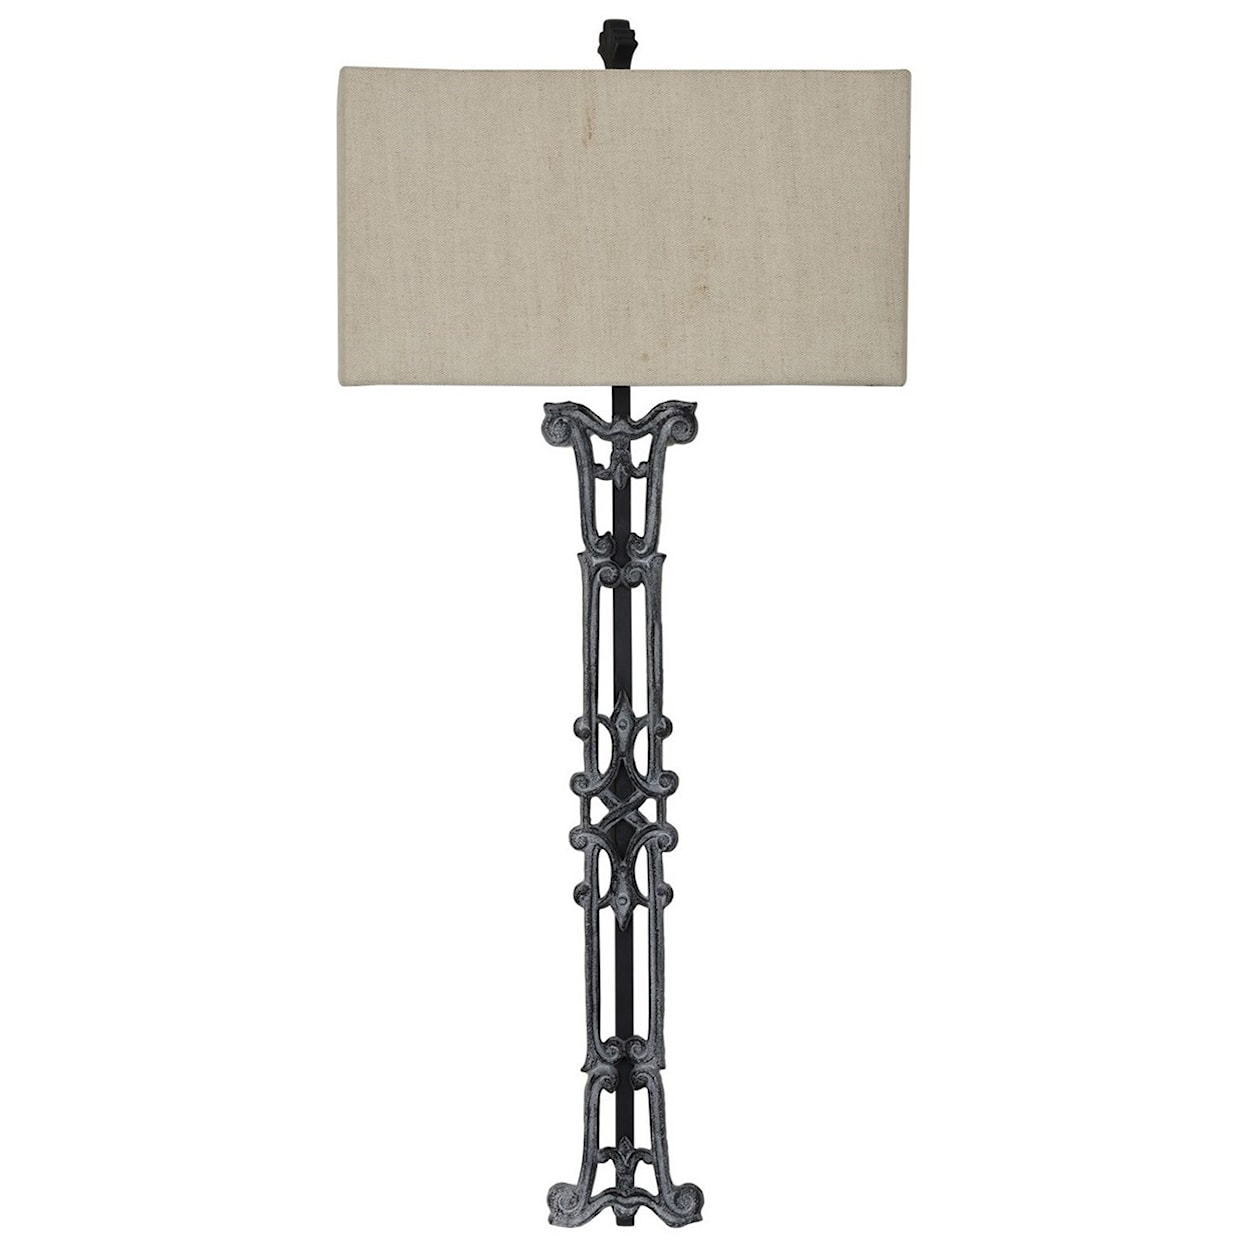 Crestview Collection Lighting Maxwell Wall Lamp